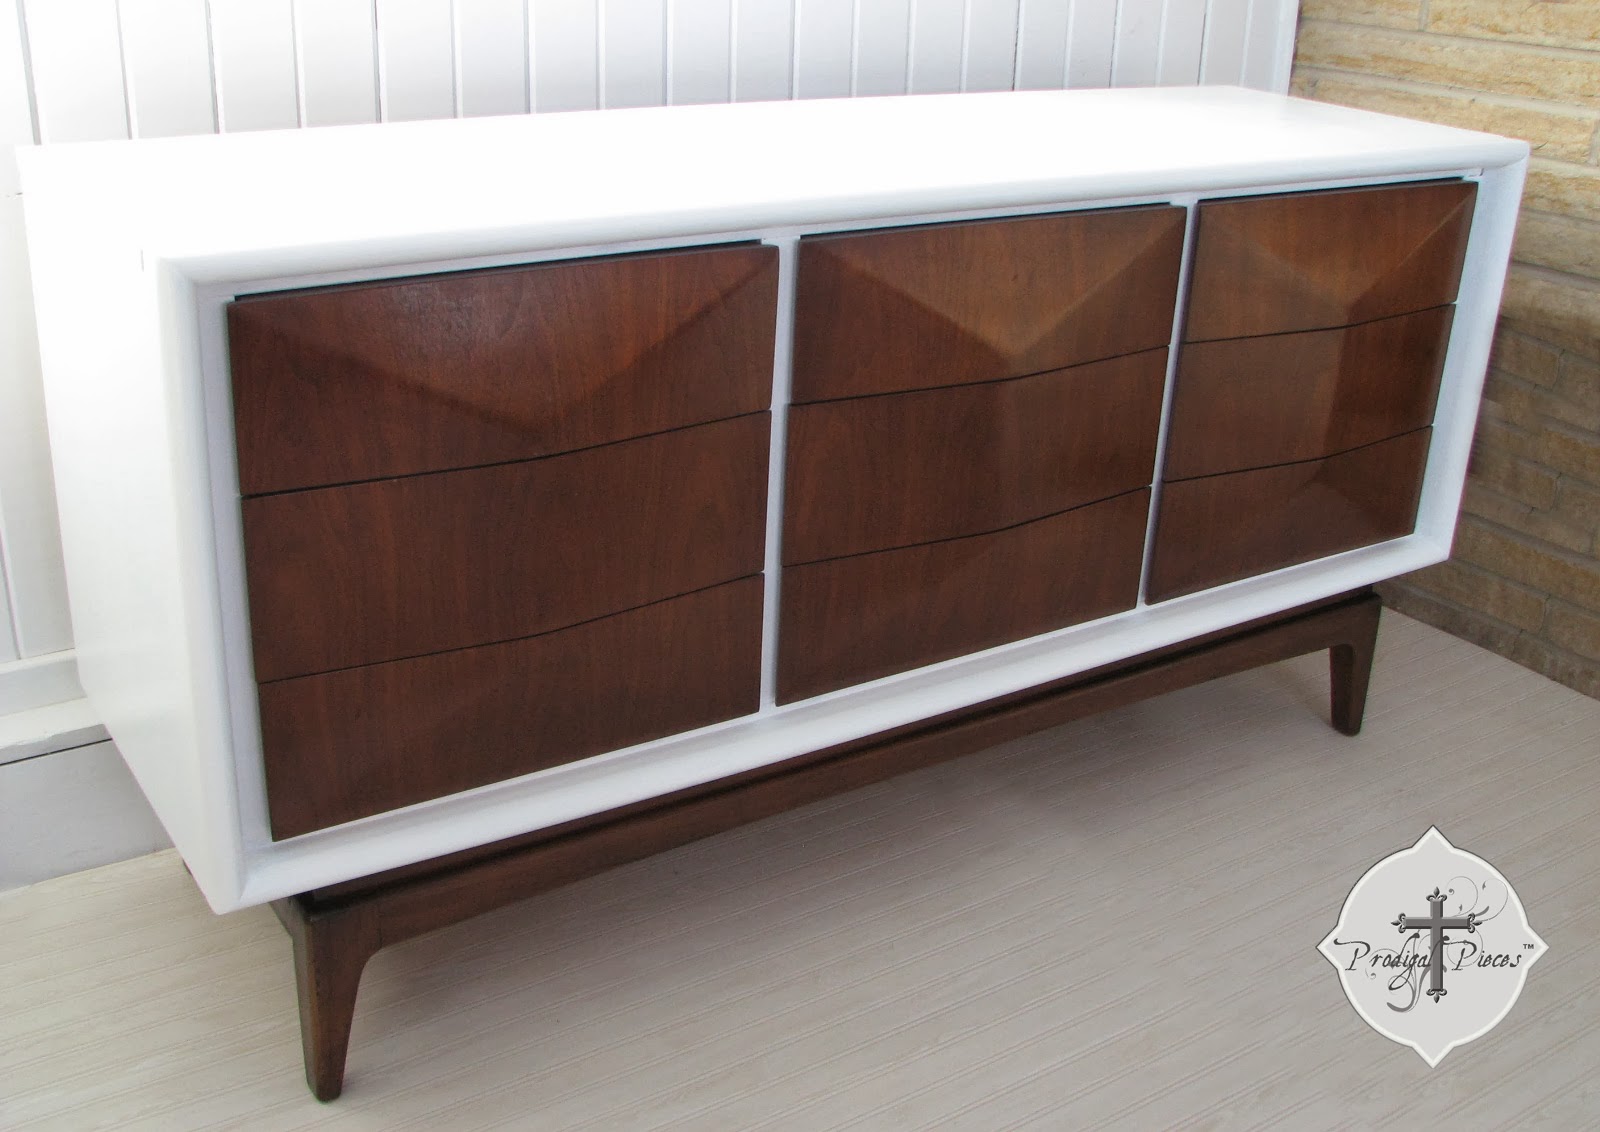 Vintage Mid-Century Modern Console Dresser by Prodigal Pieces